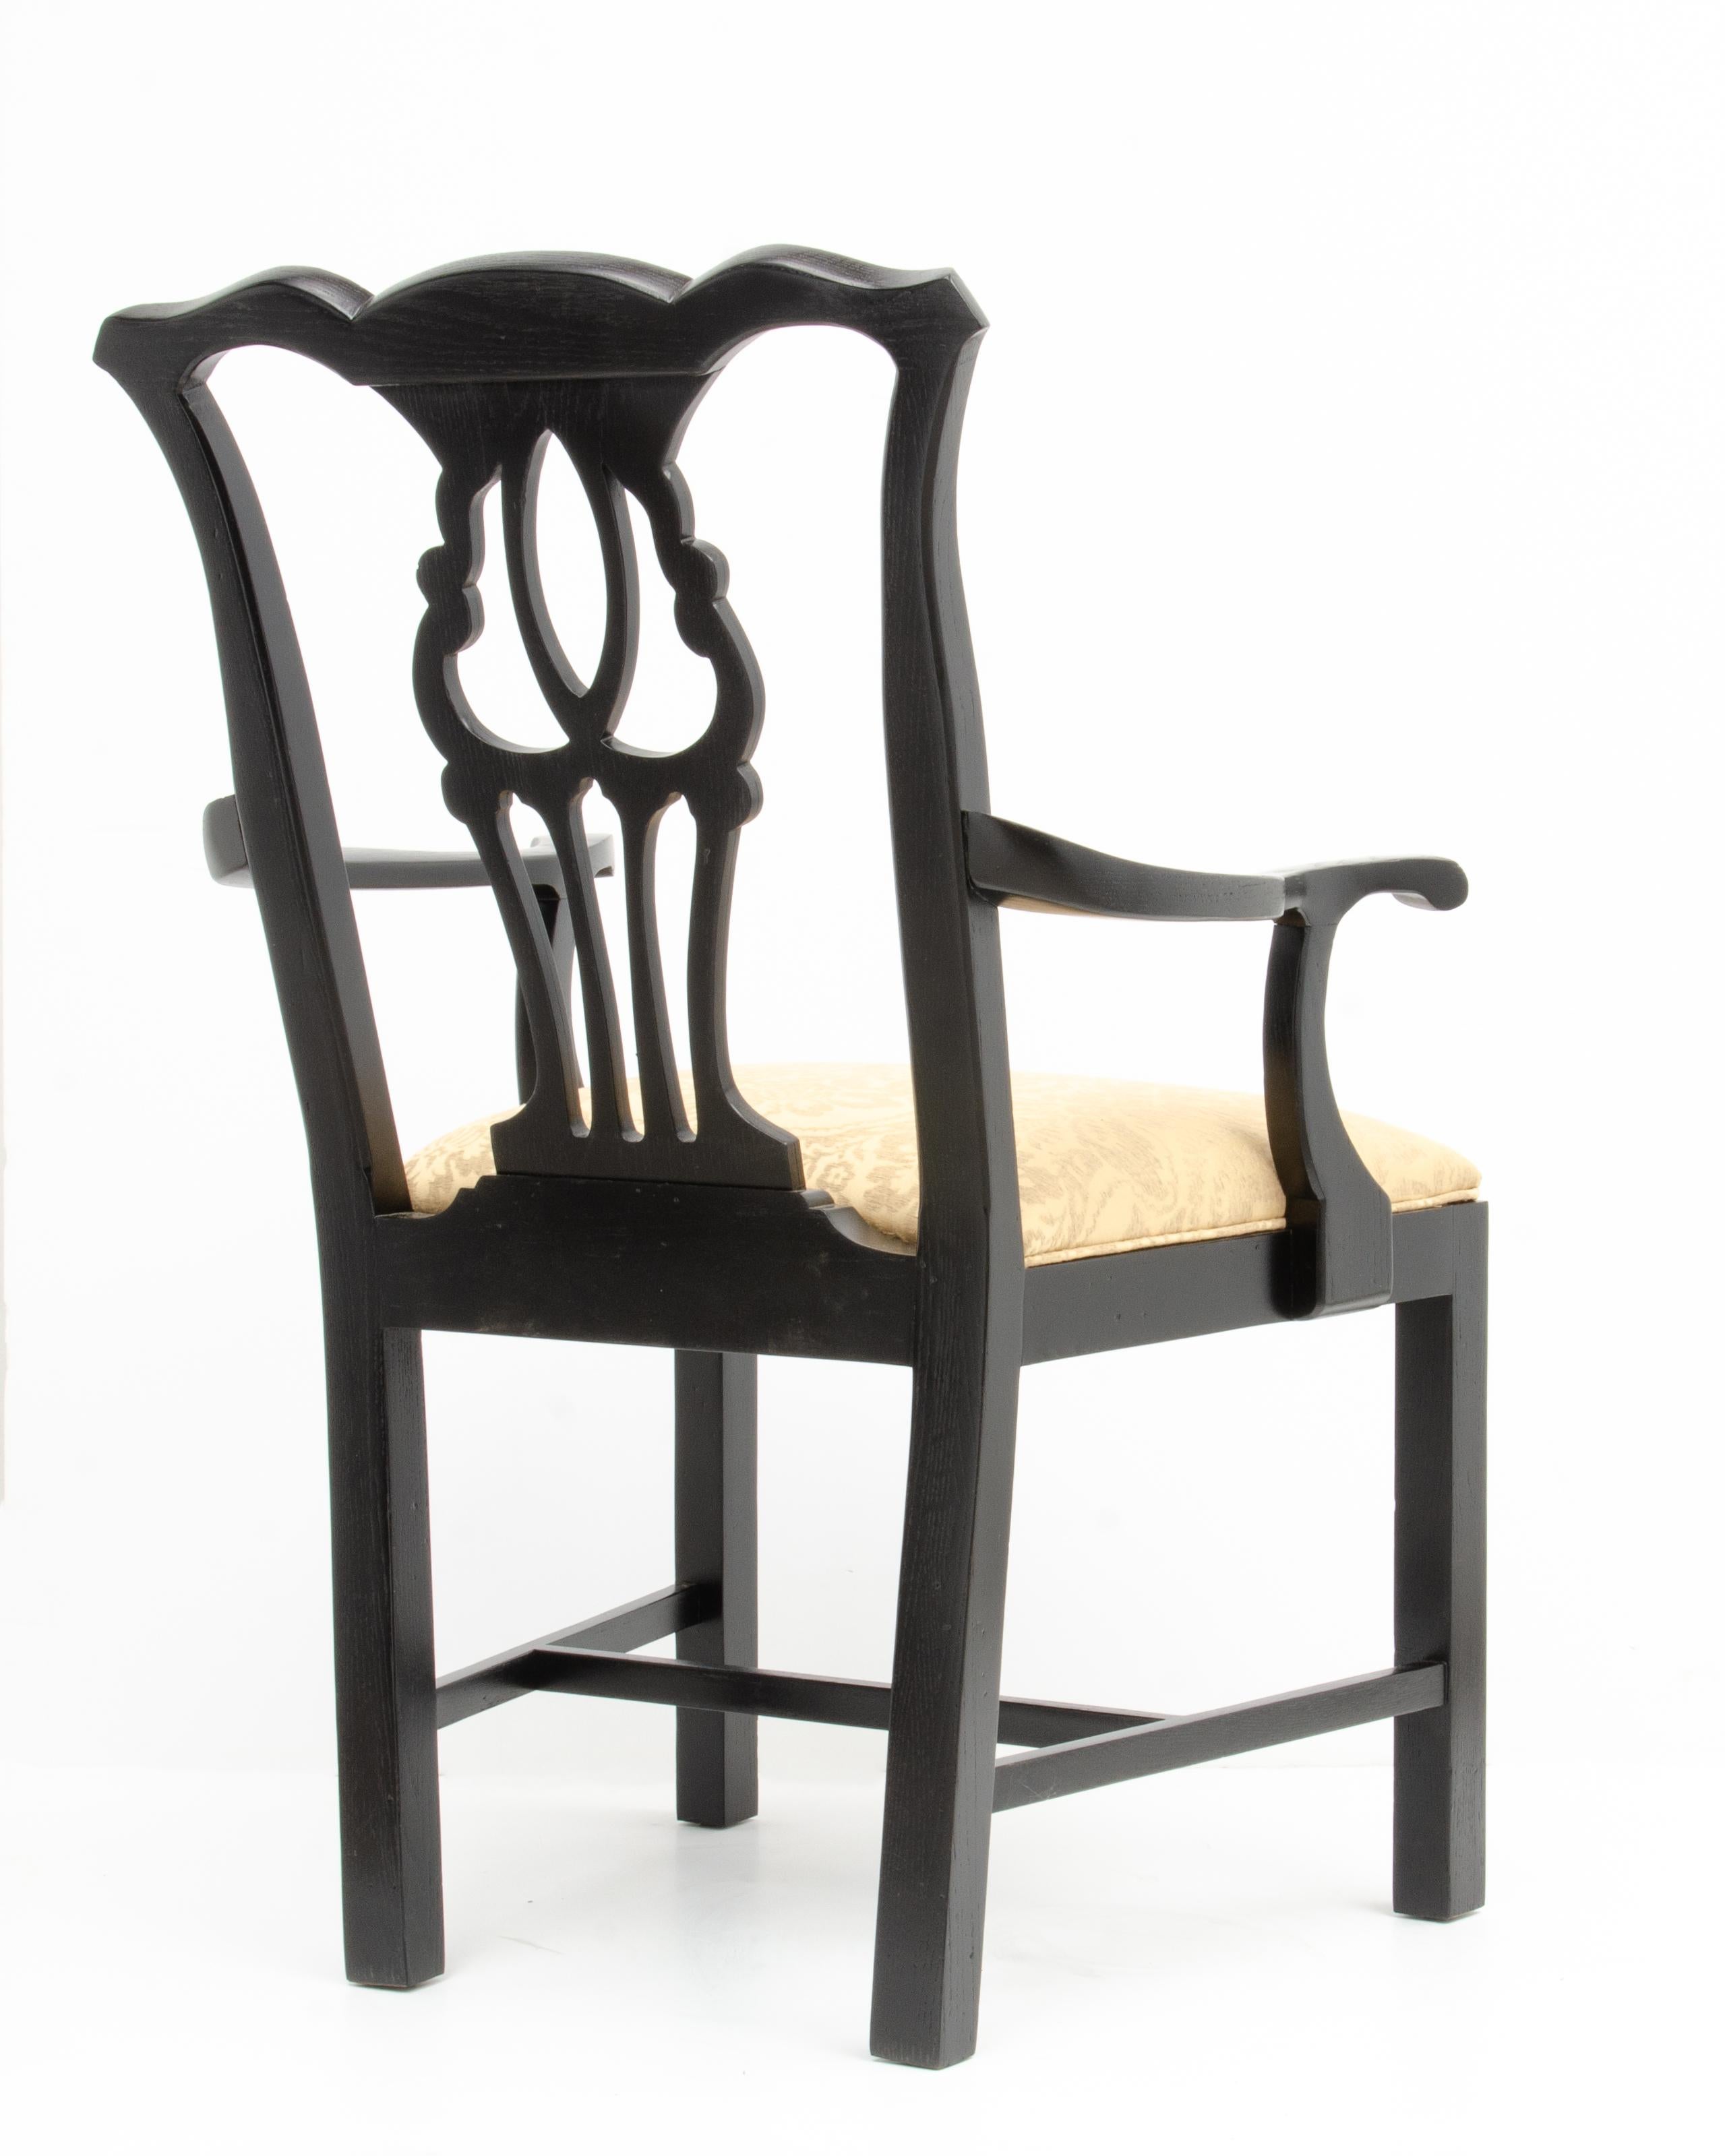 Black Lacquer John Stuart Chippendale Dining Chairs Mid Century - a Set of 6 In Good Condition For Sale In Forest Grove, PA